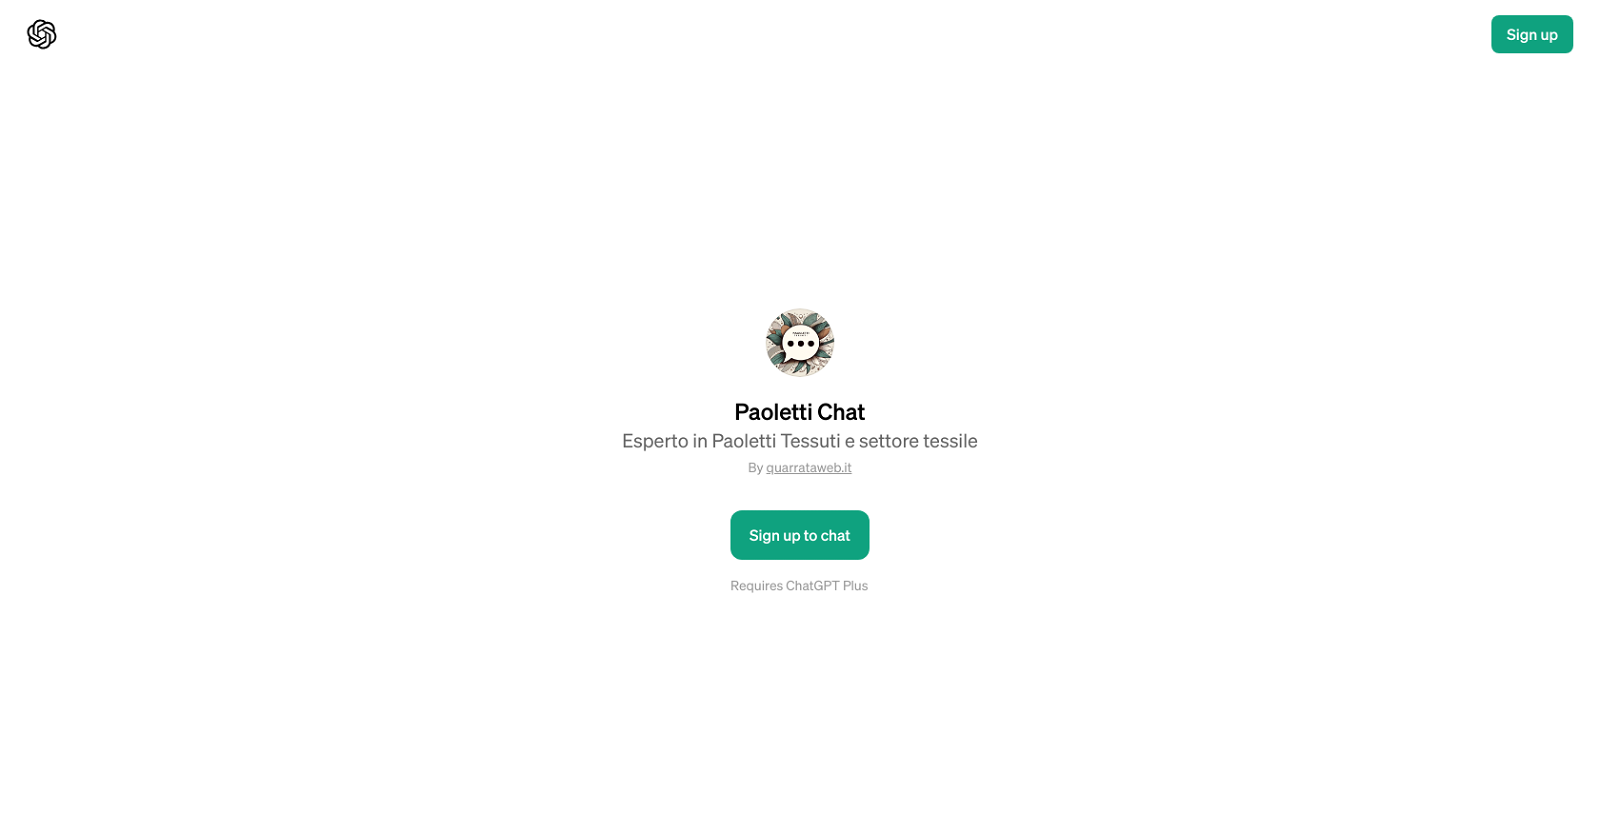 Paoletti Chat website